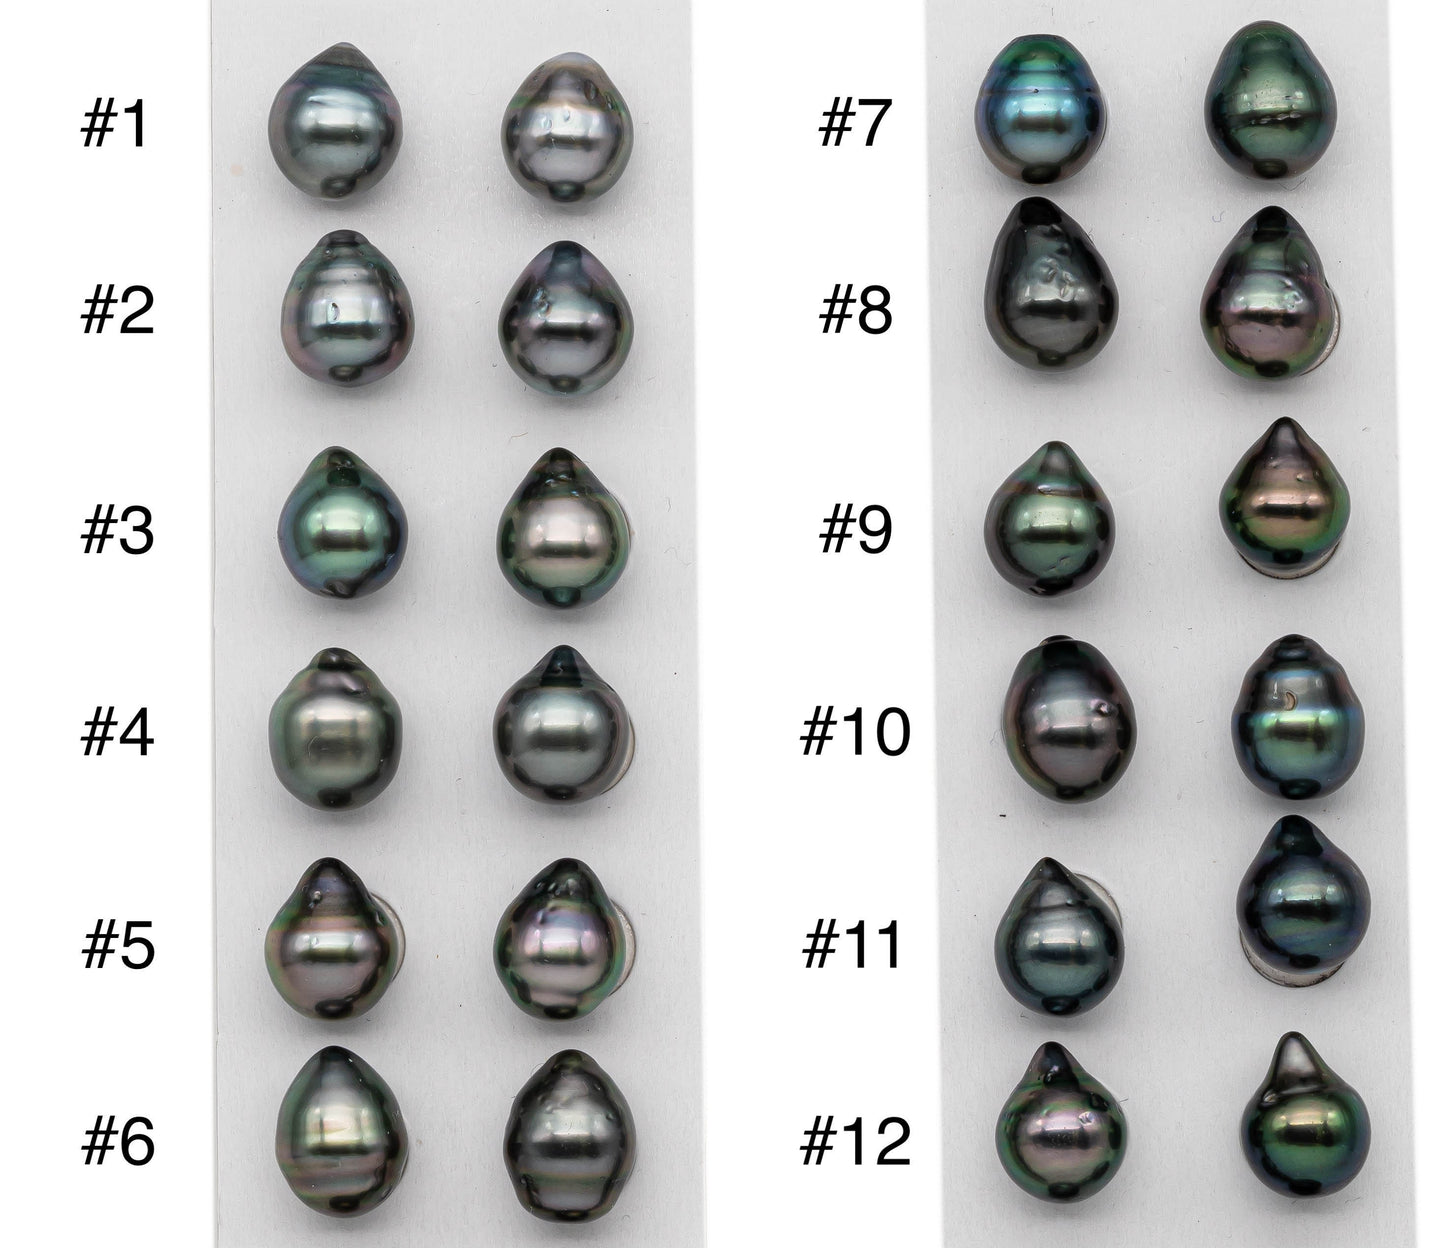 Teardrop Loose Tahitian Pair Pearls, Undrilled Loose Pearl Beads, High Luster with Blemishes, 9.5-10mm, SKU# 1052TH